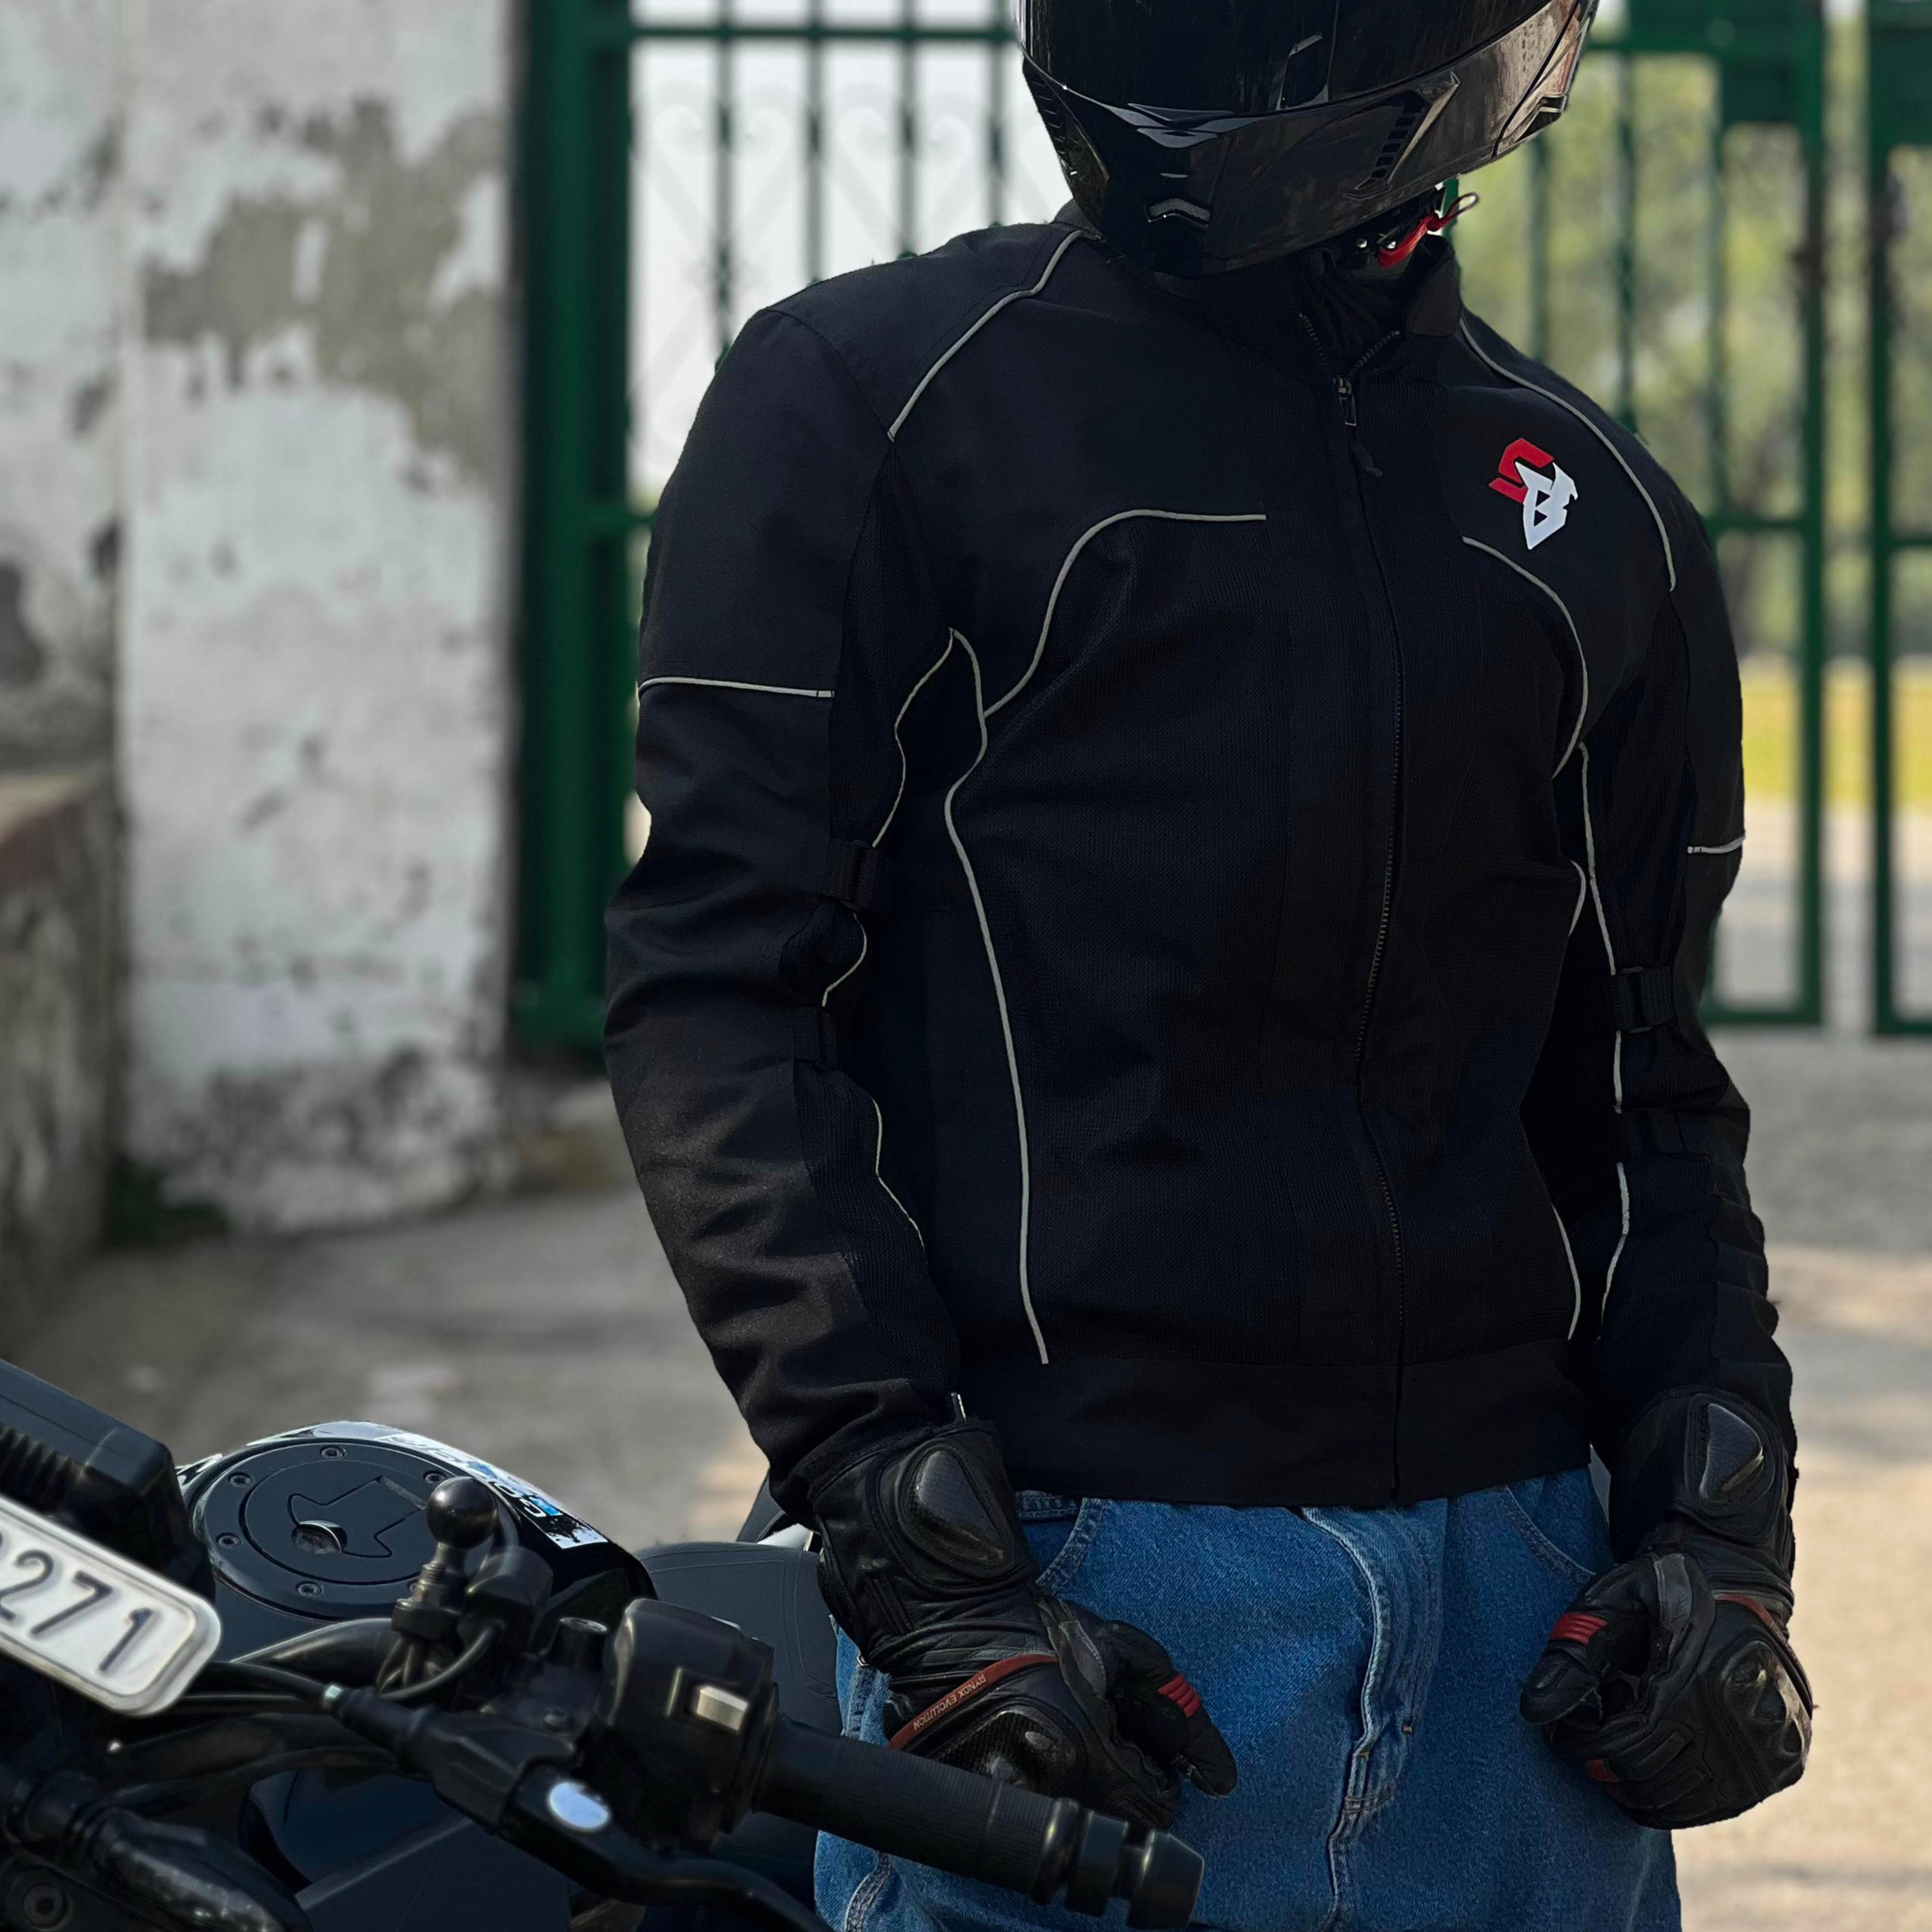 Steelbird Zojila Z1 Riding Jacket With Impact Protection And Abrasion Resistance